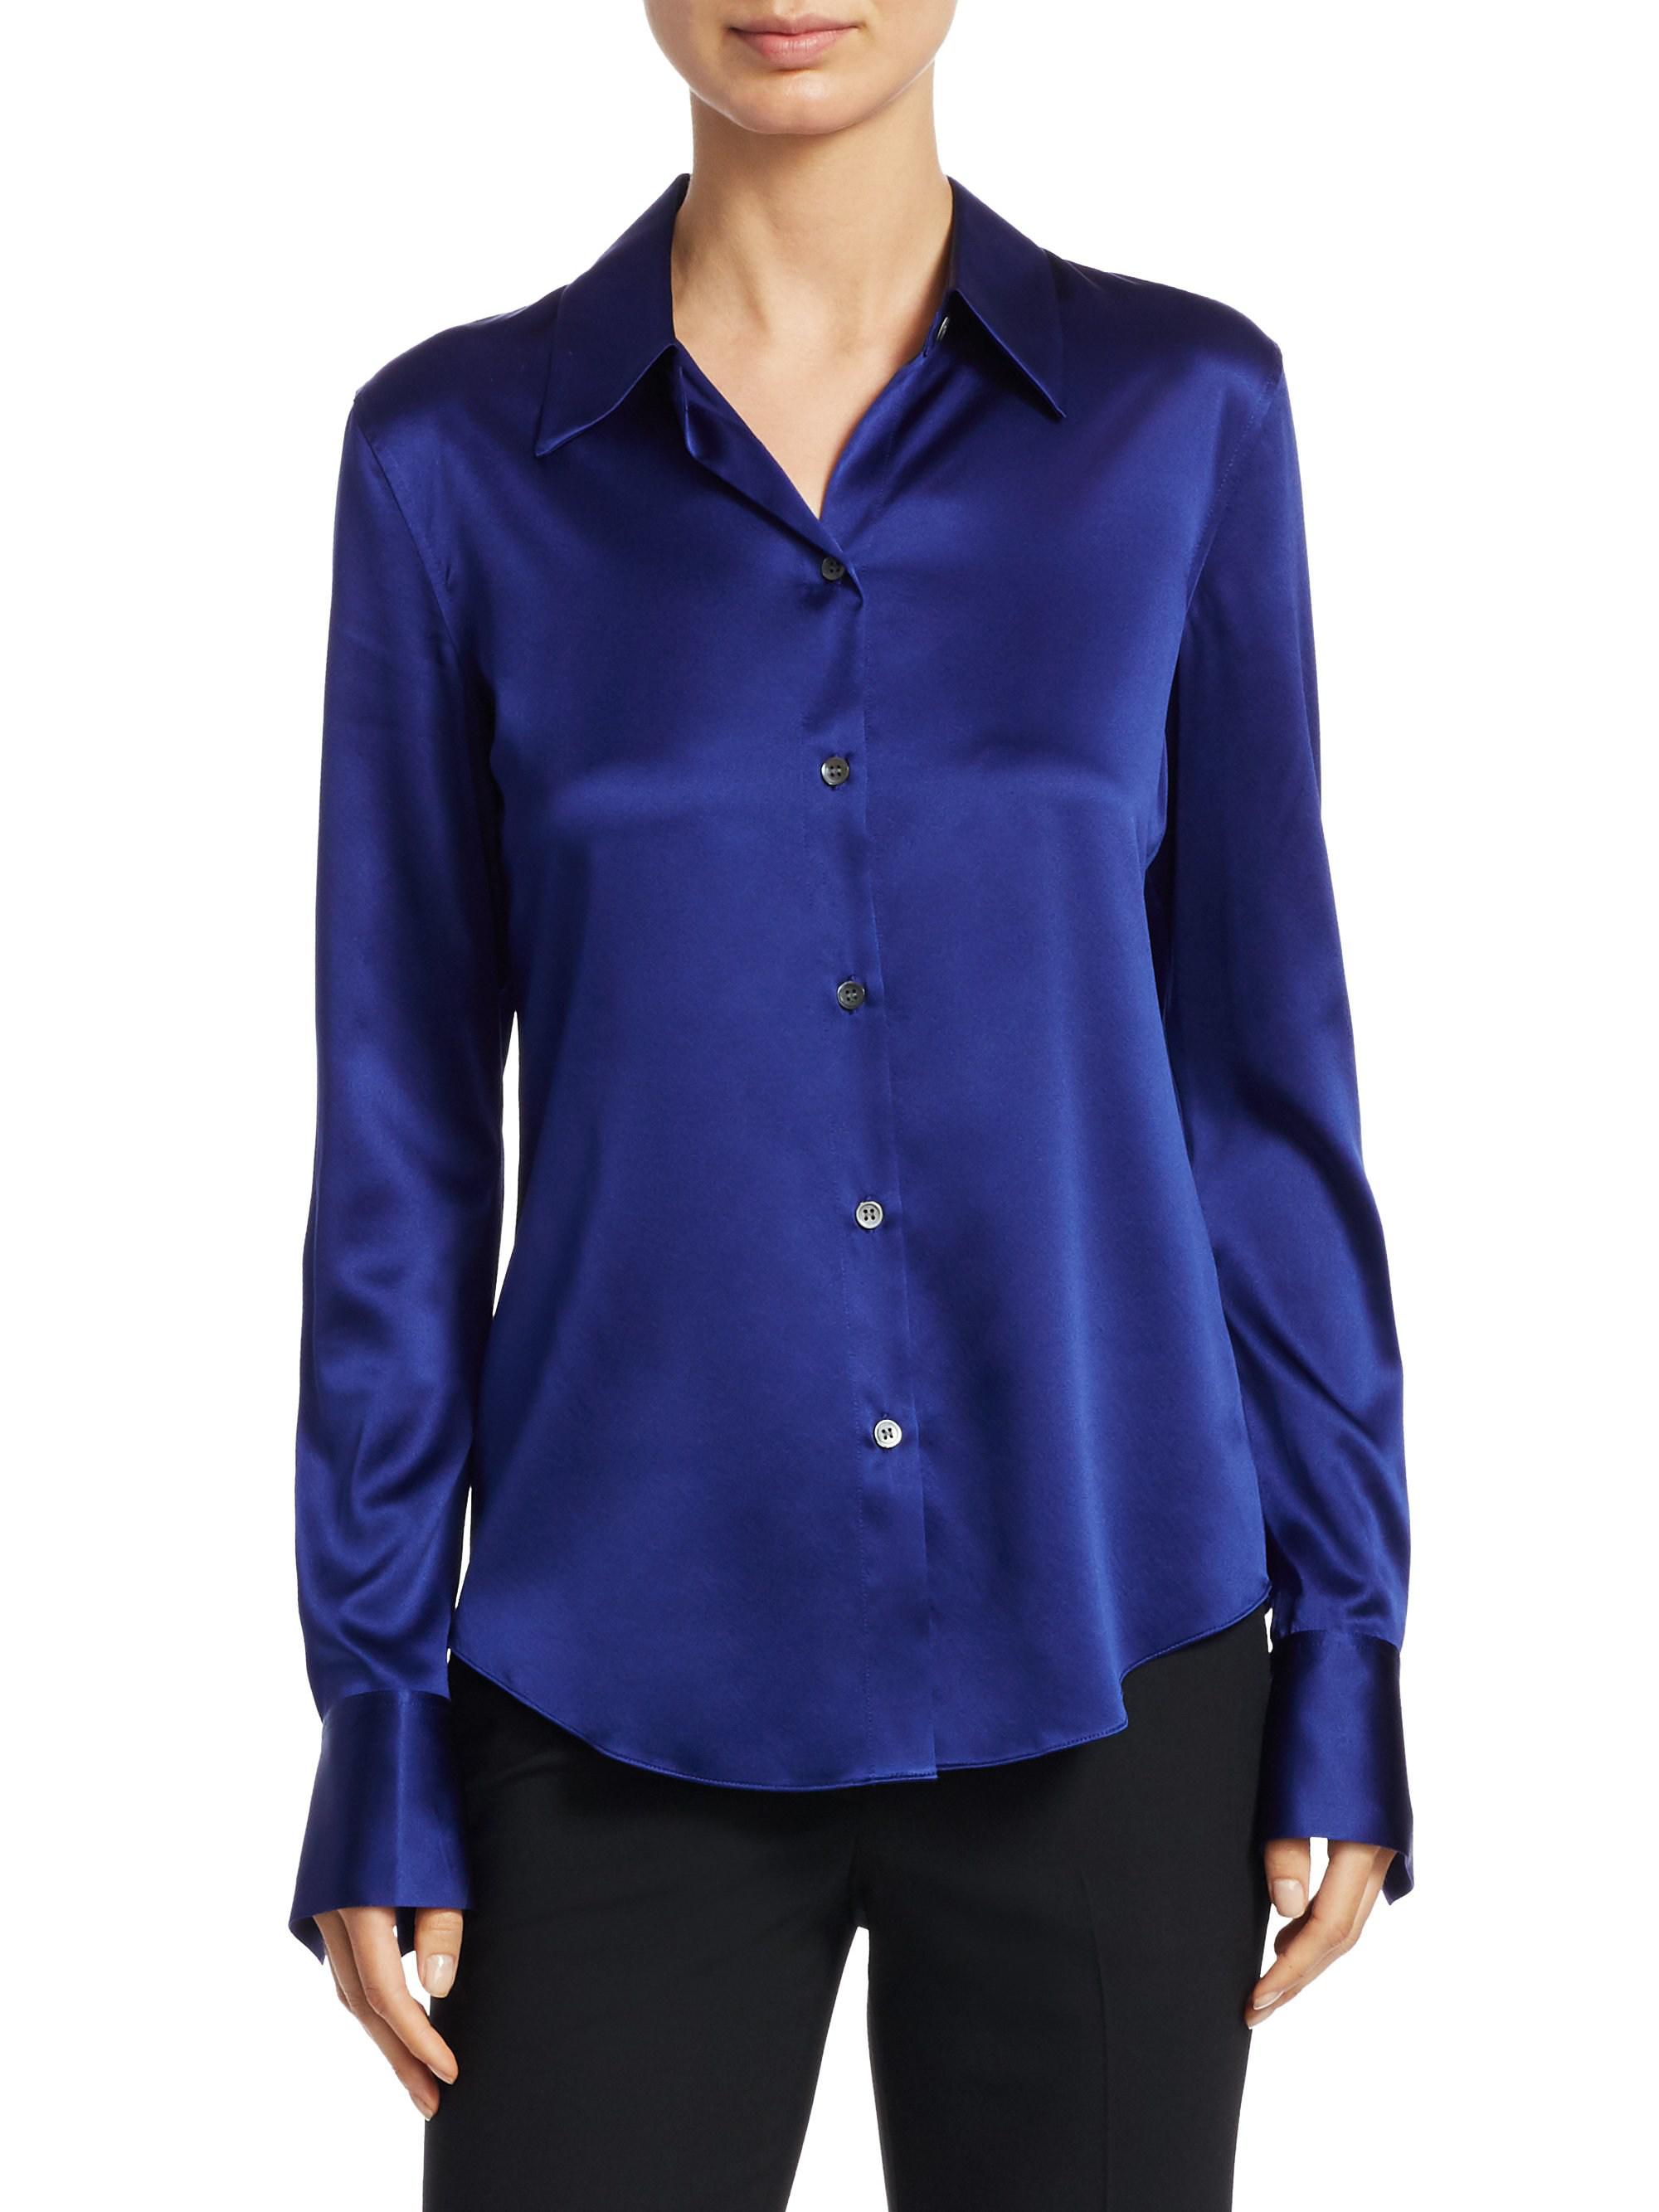 Lyst - Theory Satin Button-down Shirt in Blue